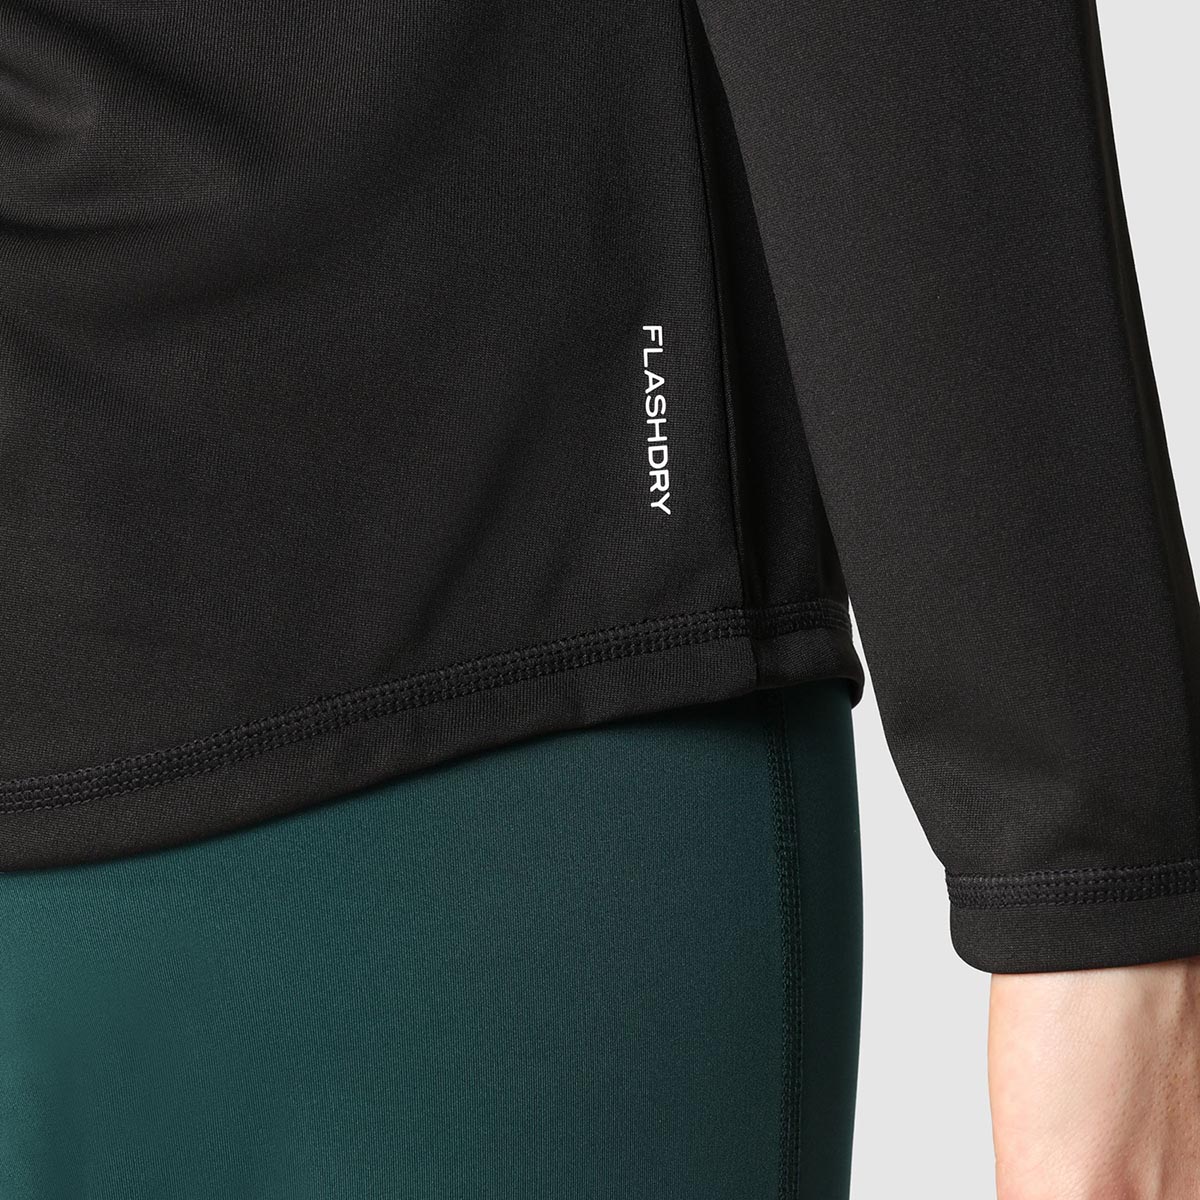 THE NORTH FACE - FLEX 1/4 ZIP LONG-SLEEVE TOP